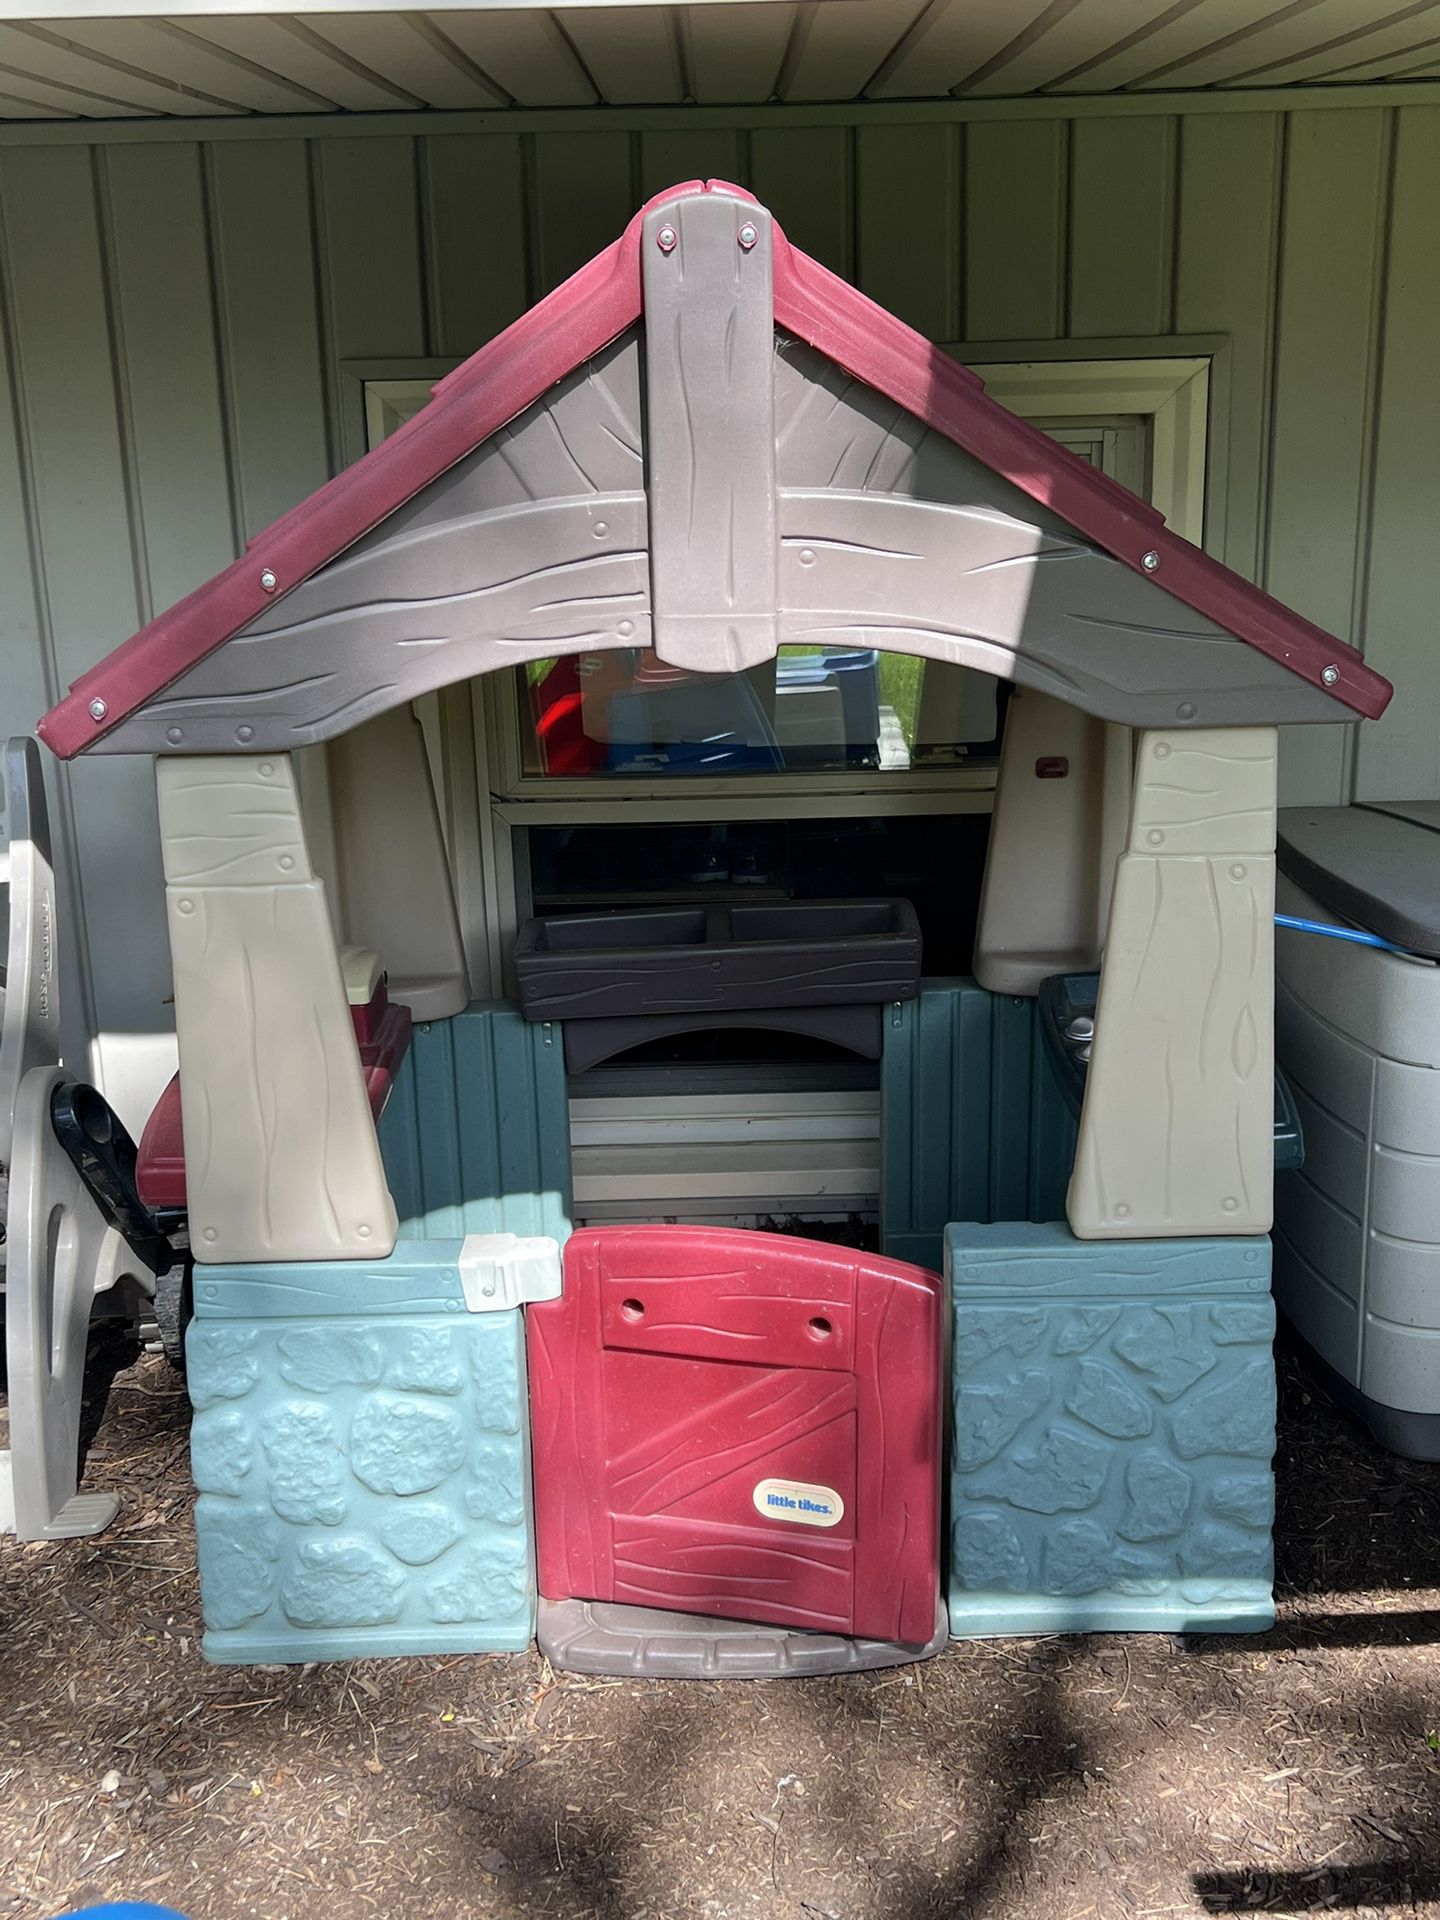 Little Tikes Play House $10 - Pending Pick Up 